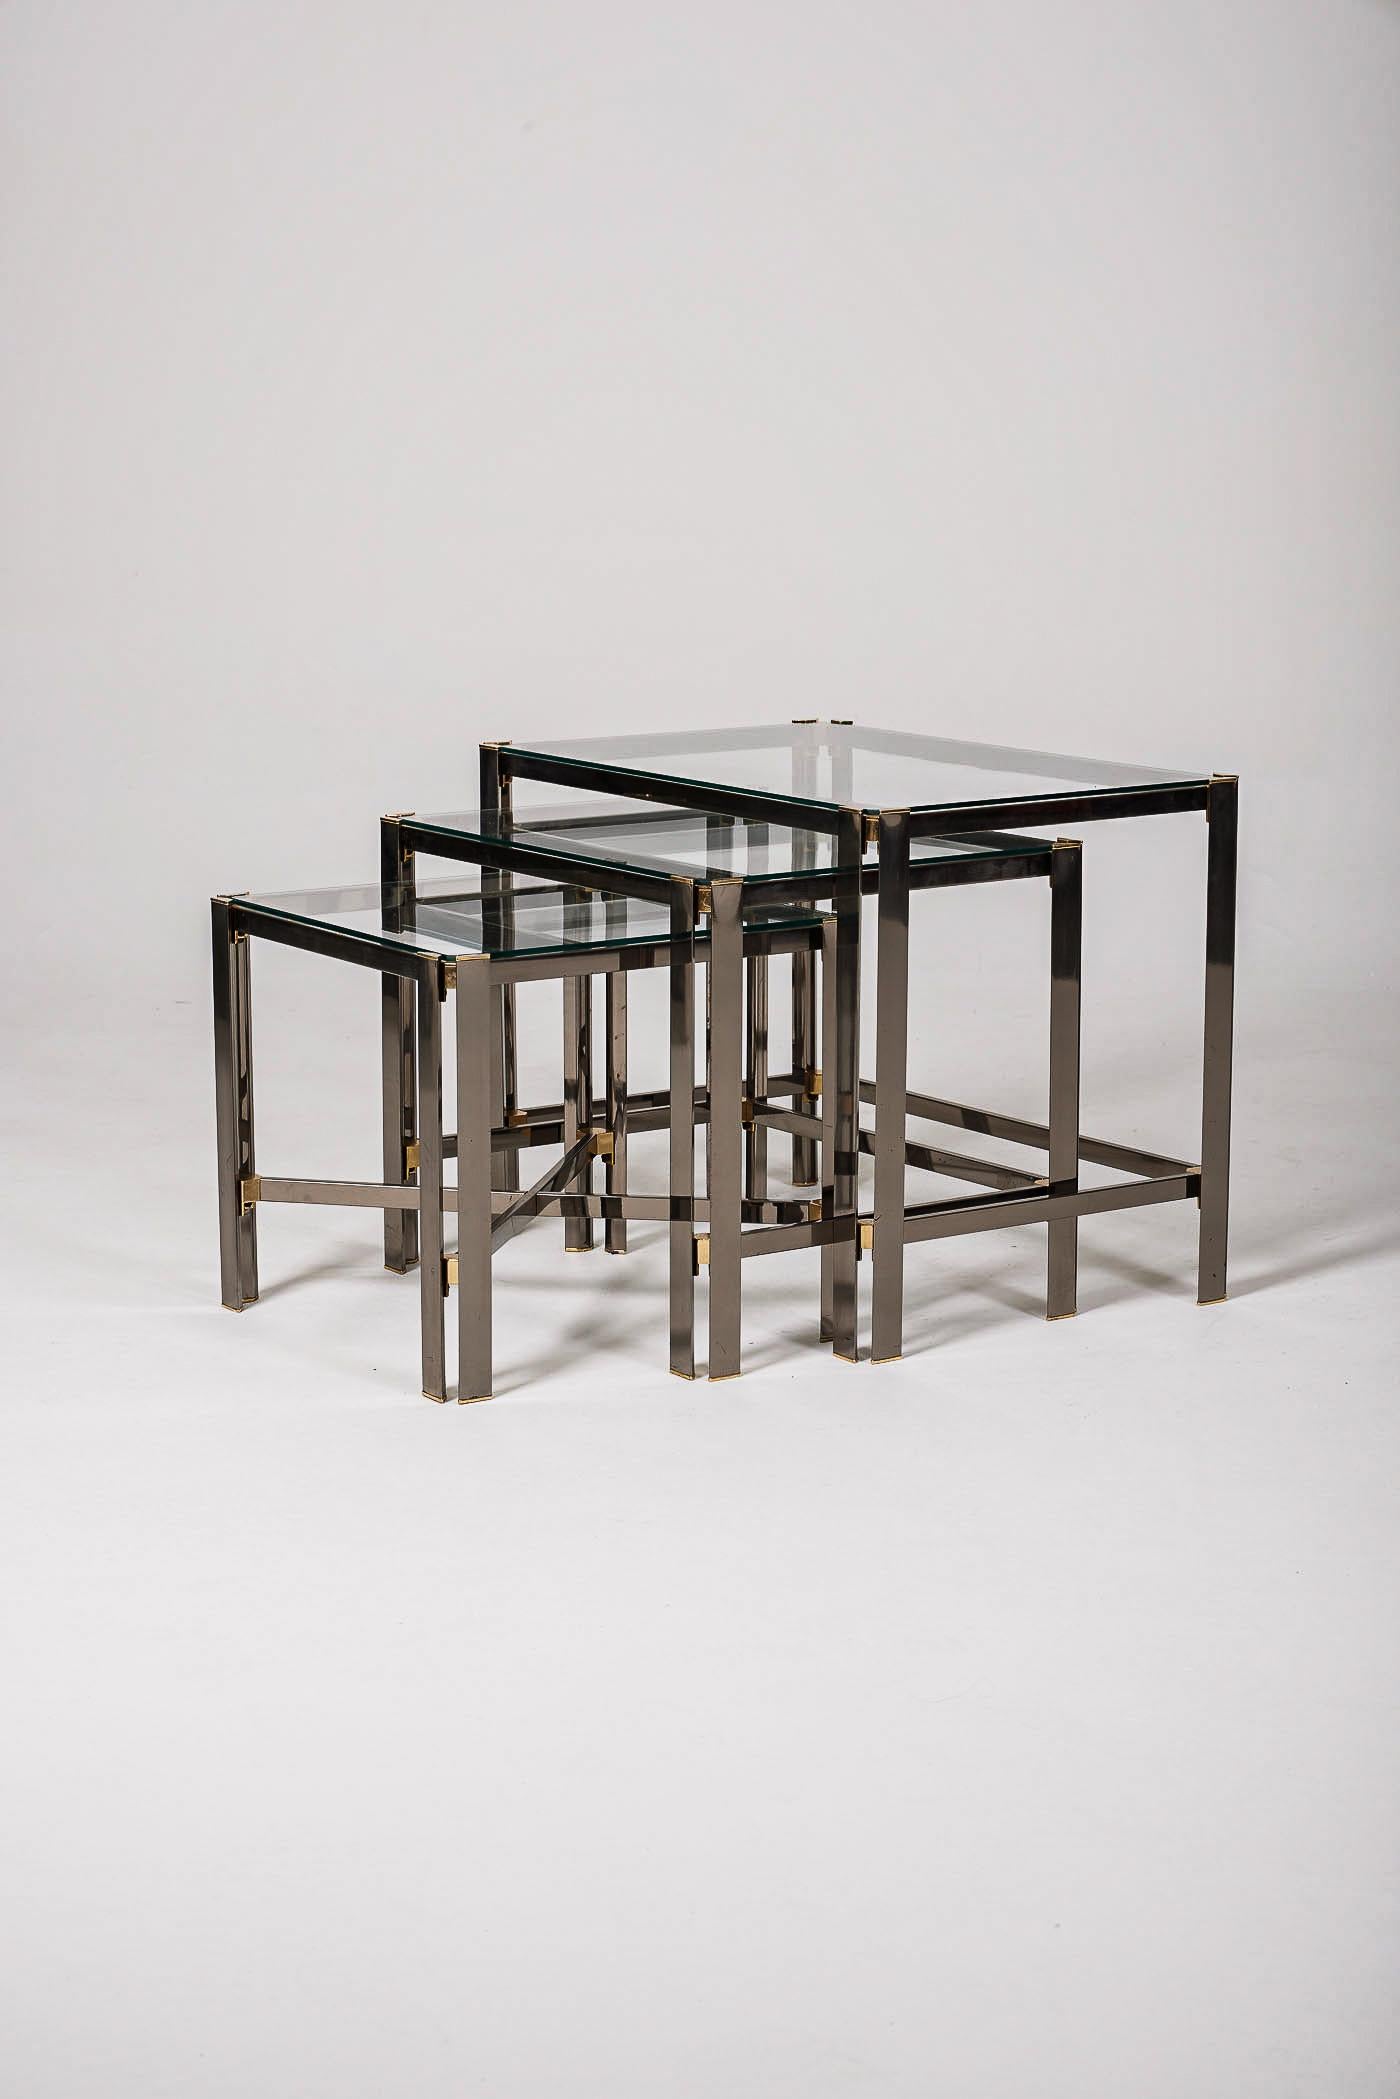 Set of 3 nesting tables from the 1970s. The structure is in gilded brass. The tabletops are made of glass. In perfect condition.
DV391